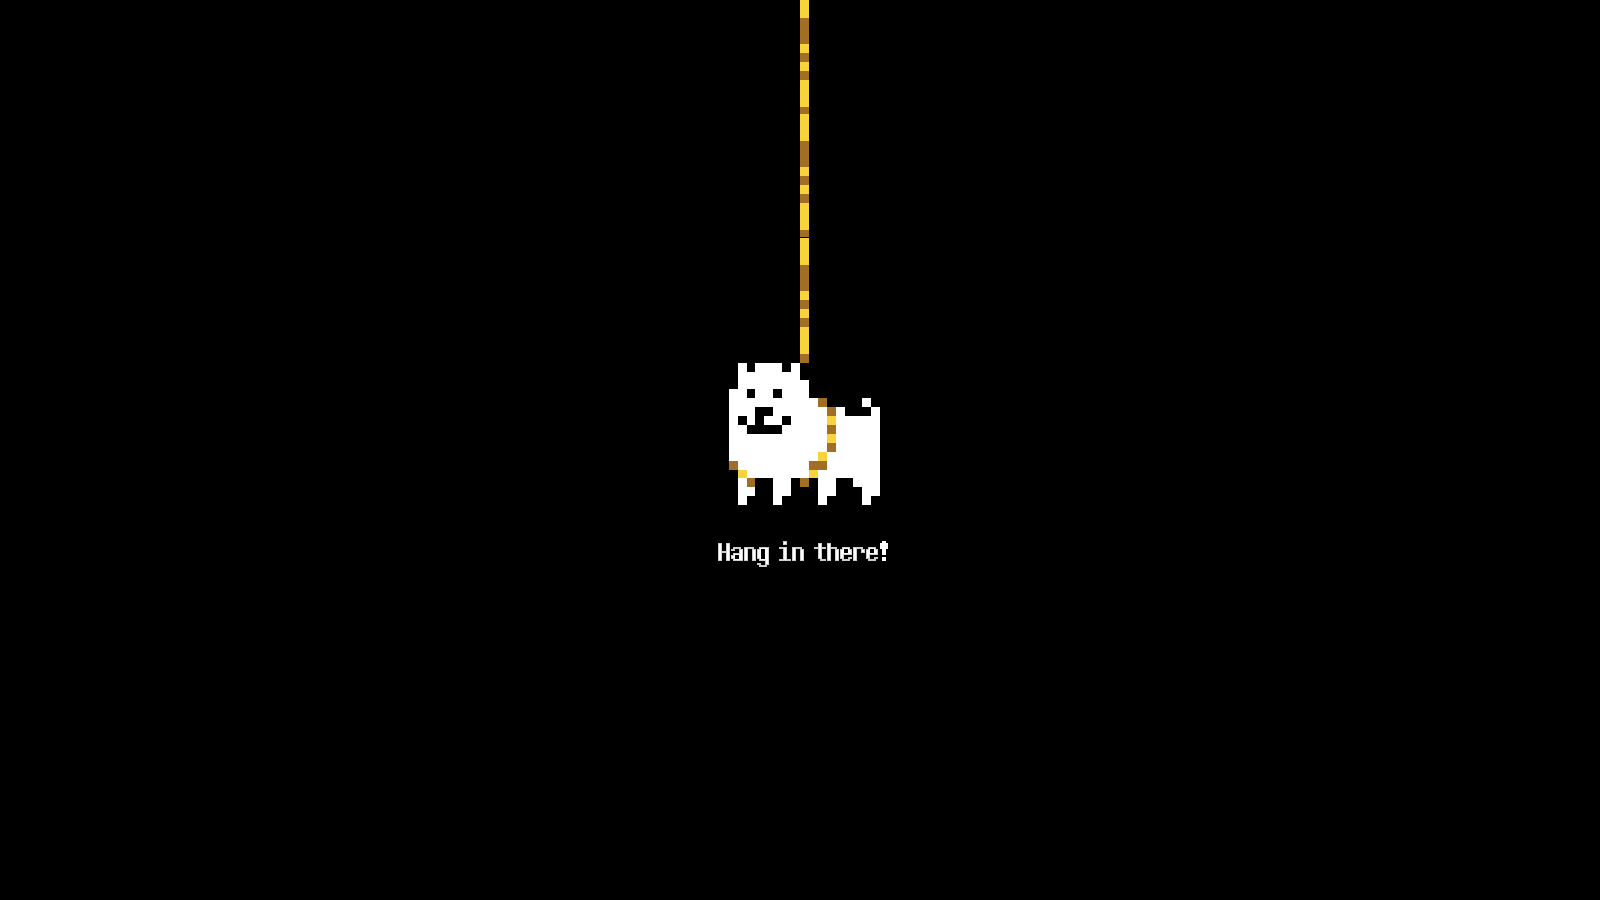 Couldn't find a wallpaper with the tied up dog so I made one